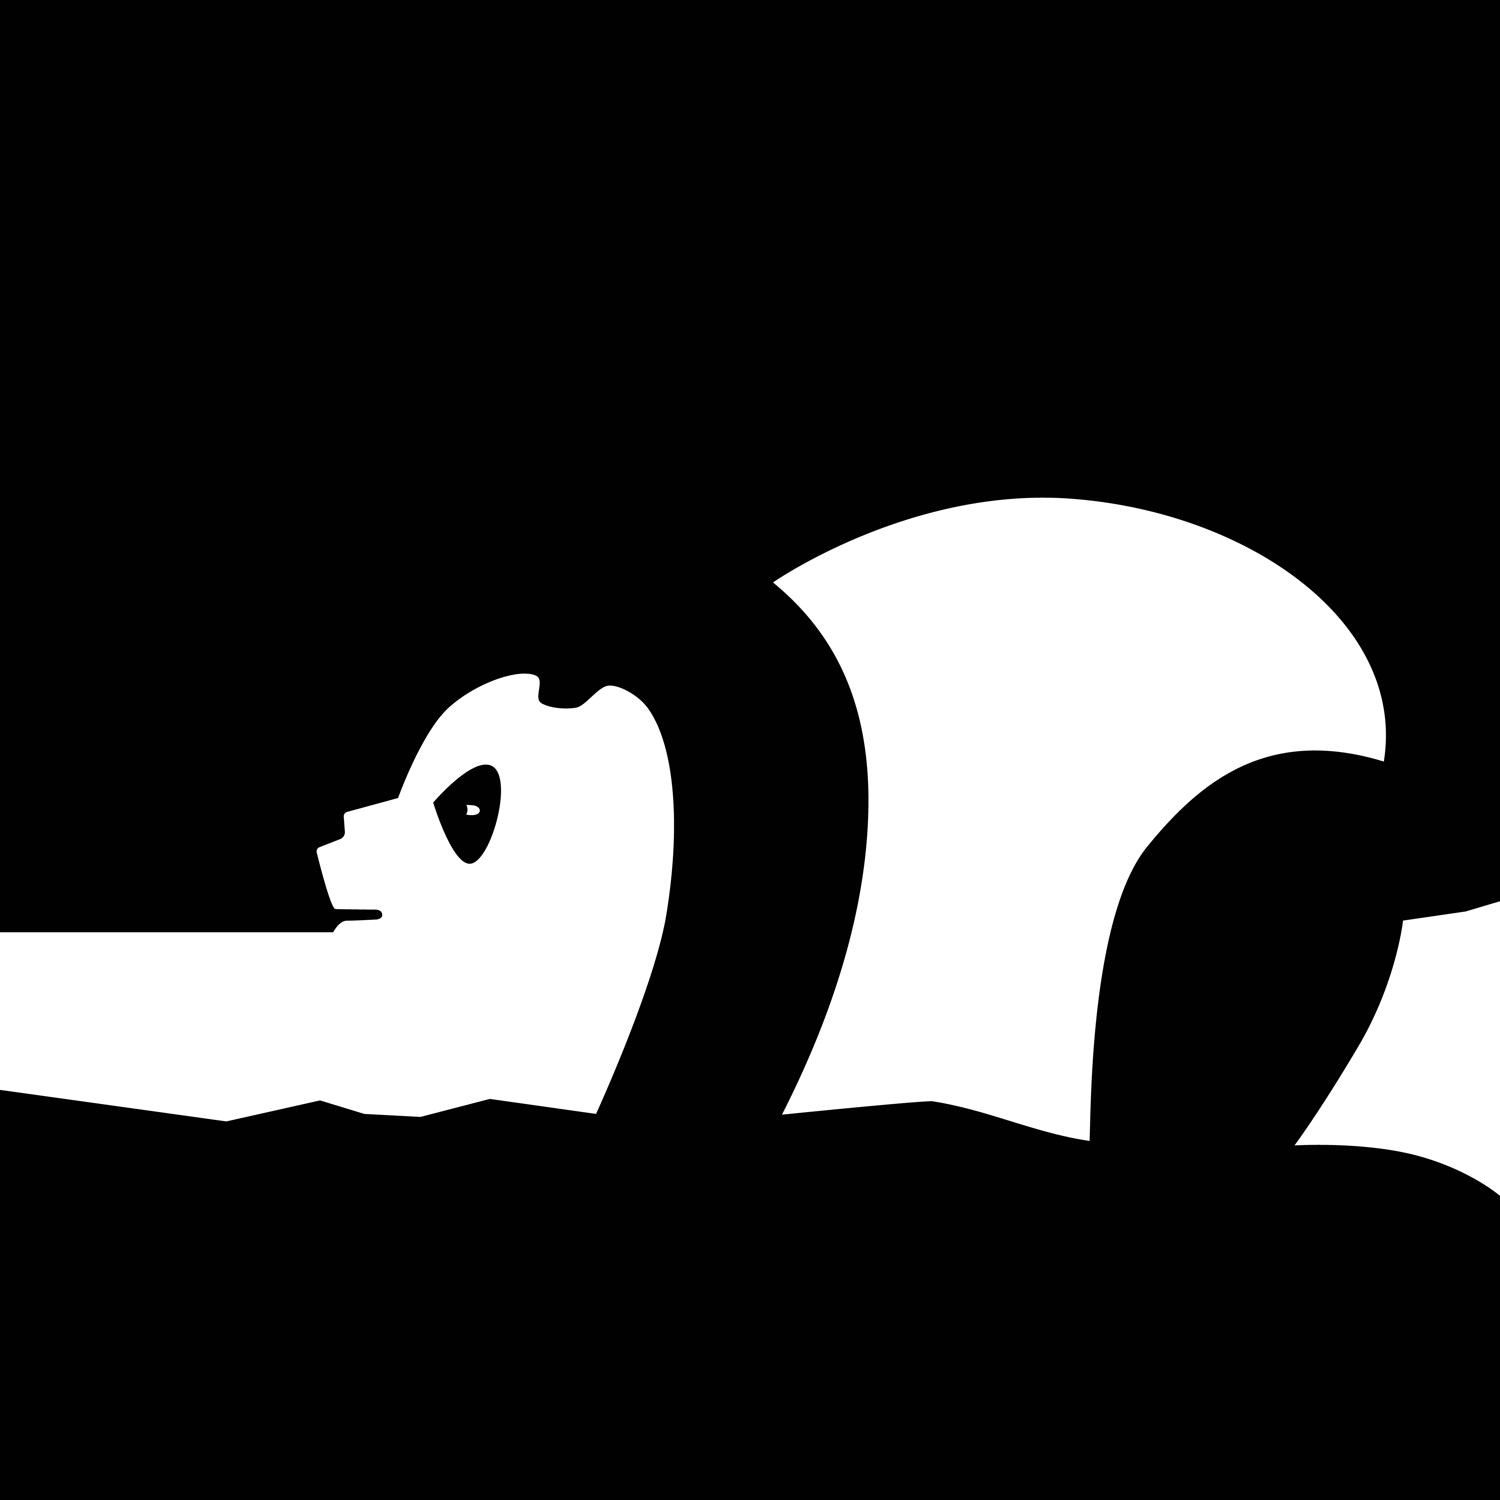 A black and white sketch of a panda falling asleep on a tree branch